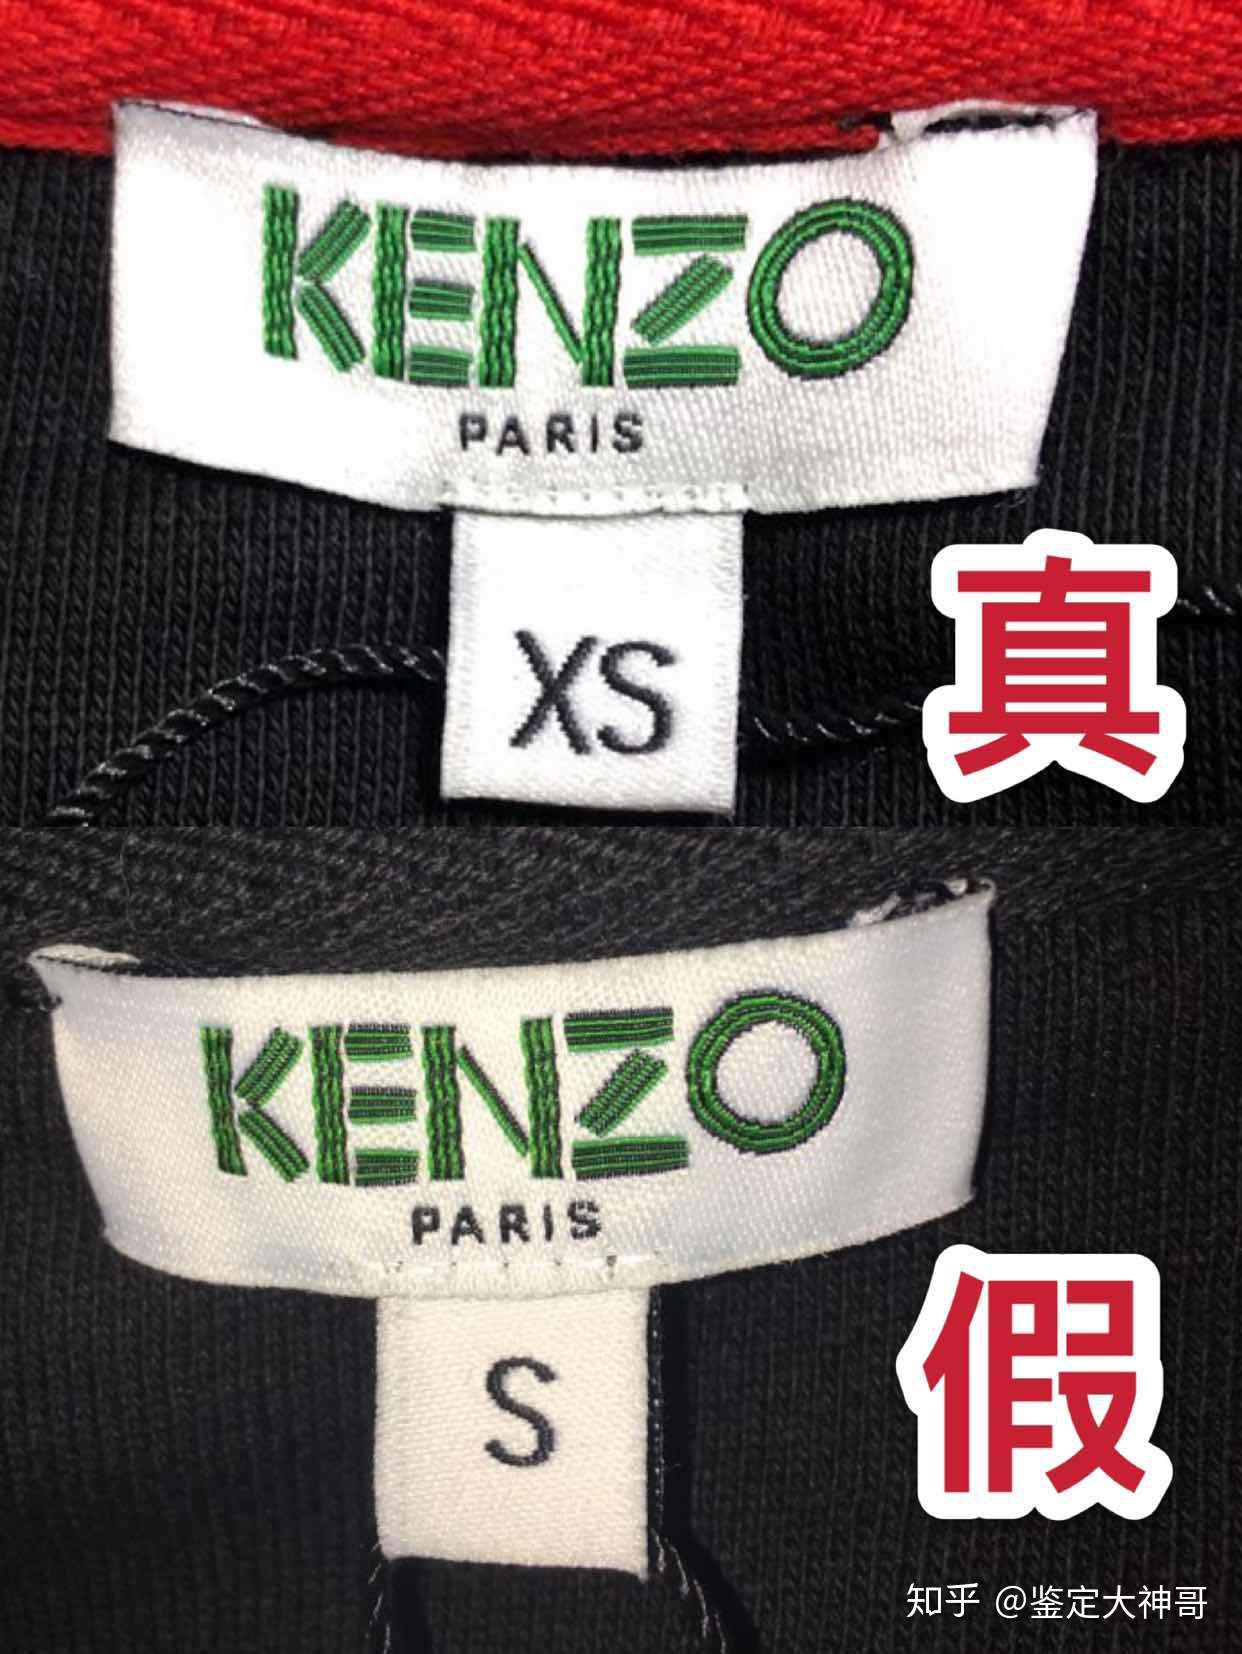 how to tell if a kenzo t shirt is real